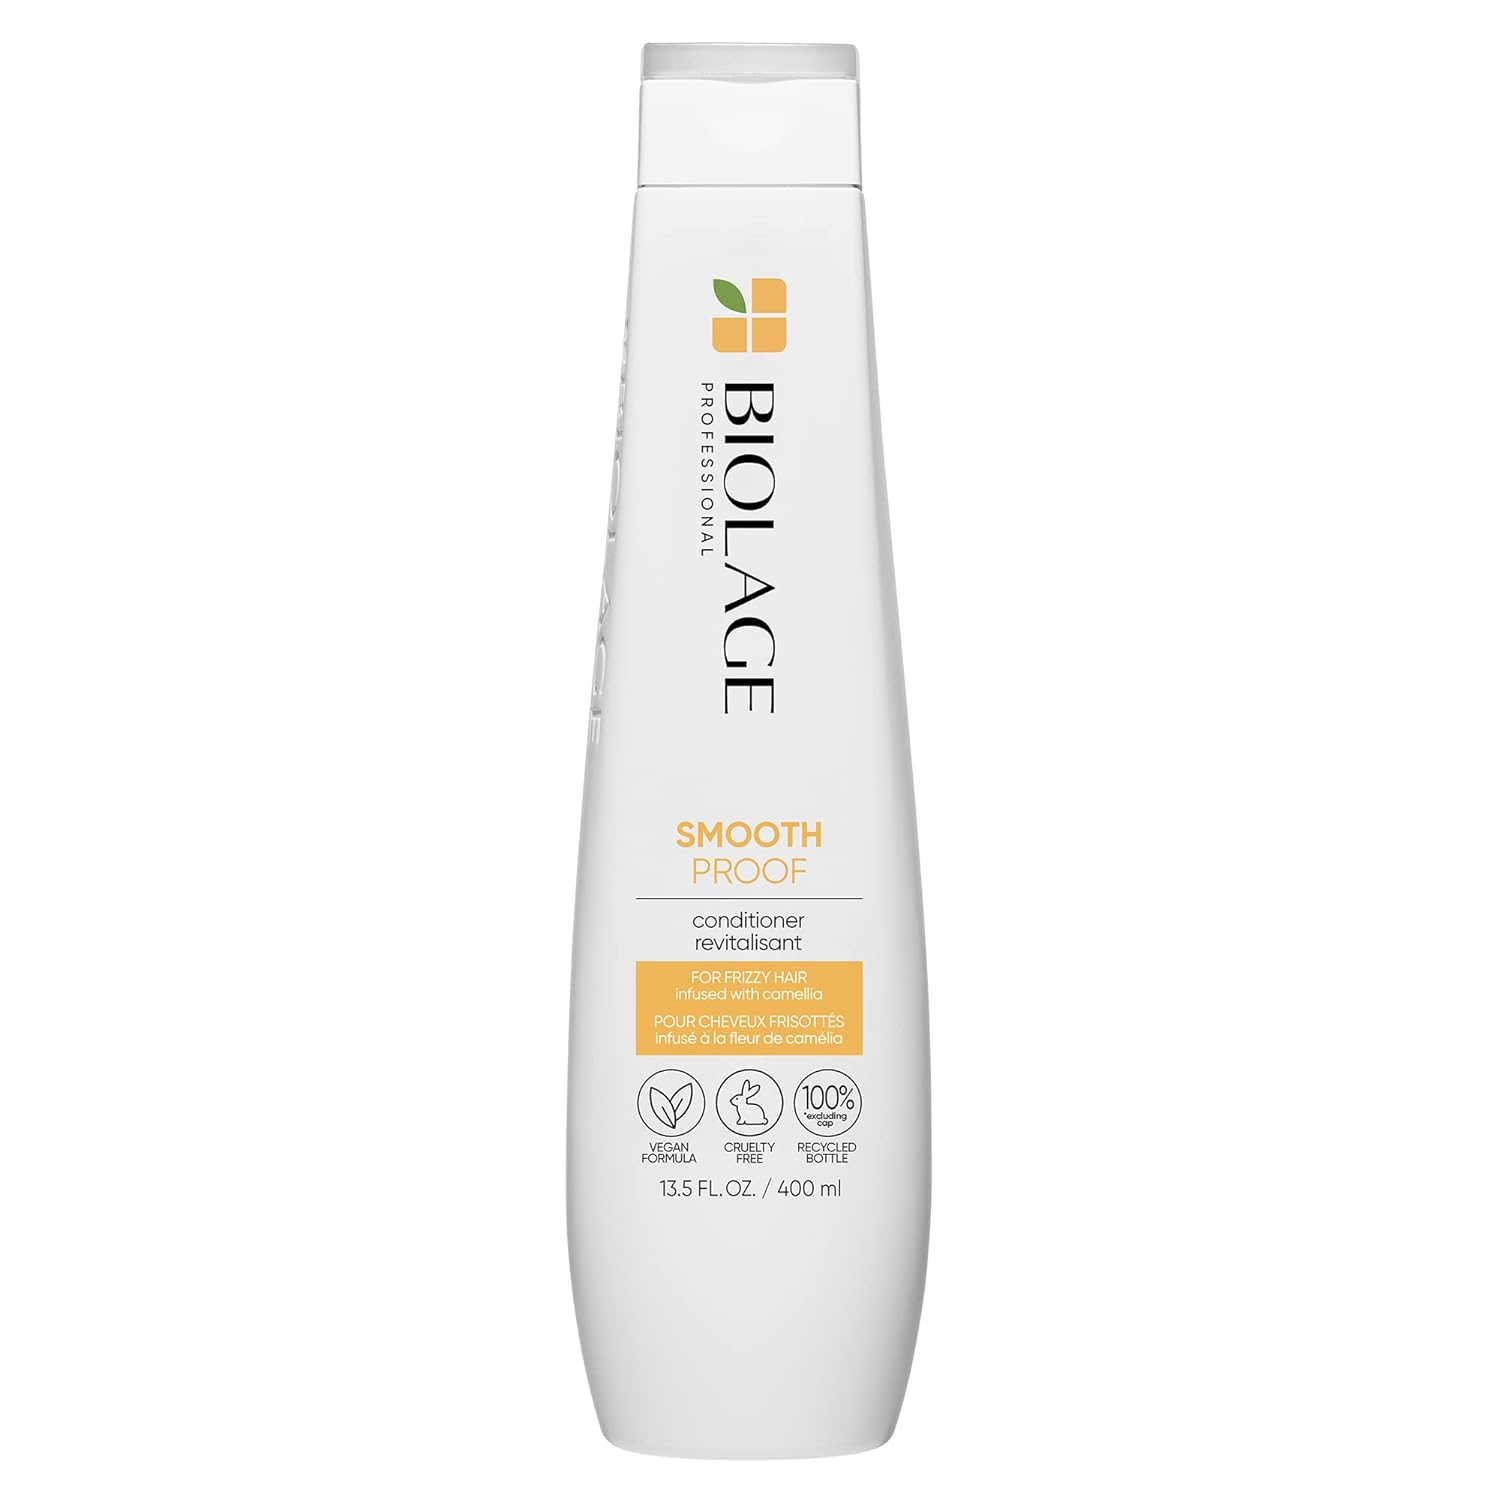 Biolage Smooth Proof Conditioner | Provides Humidity Control & Anti-Frizz Smoothness | For Frizzy Hair | Paraben & Silicone-Free | Vegan?